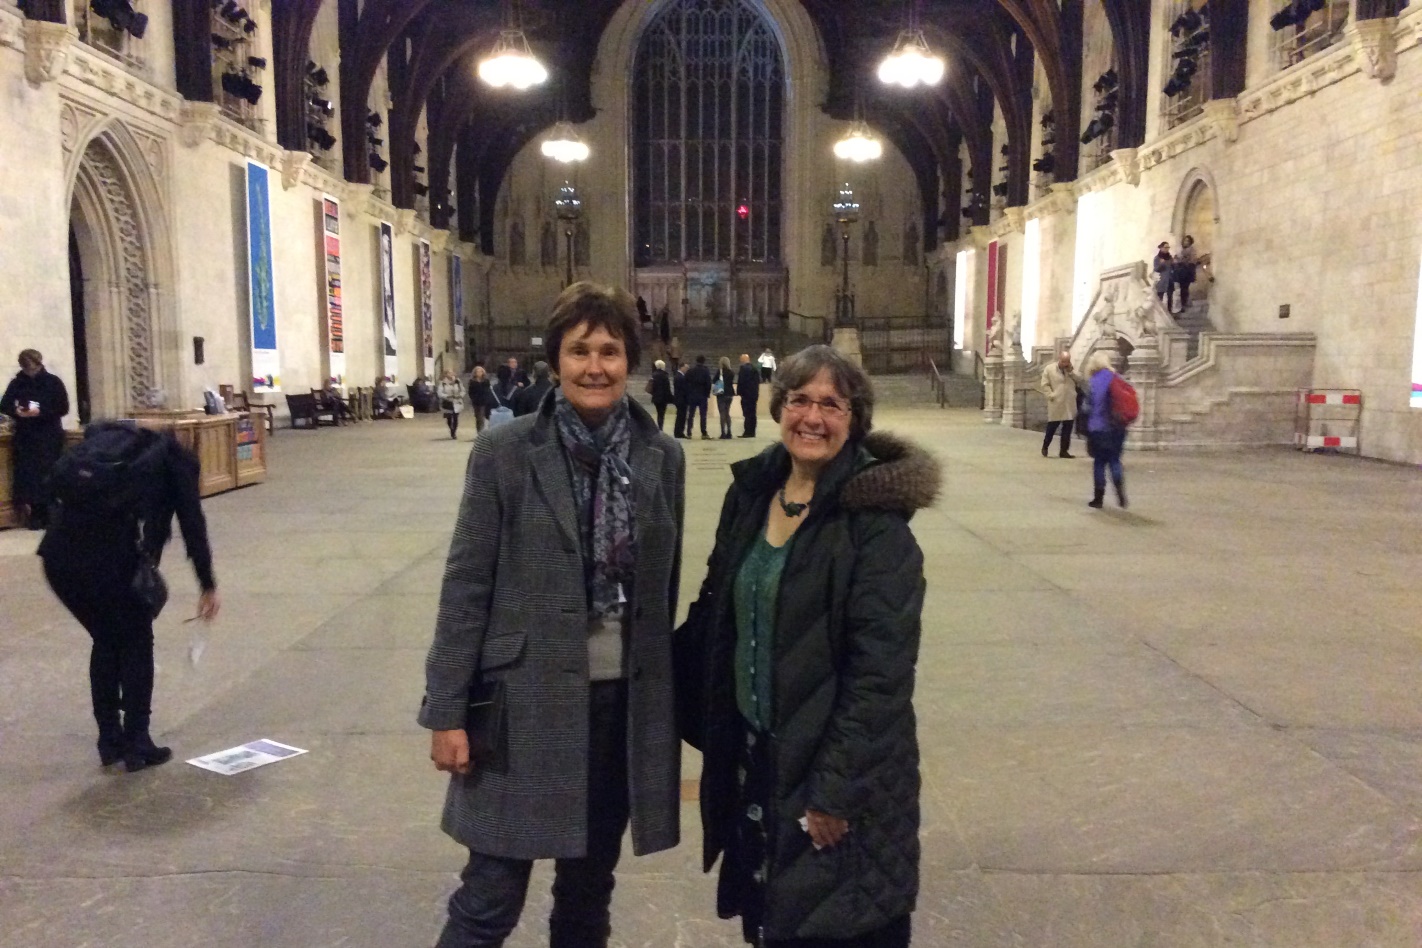 Fellows Debbie Holroyd and Rosemary Brown in the Houses of Parliament